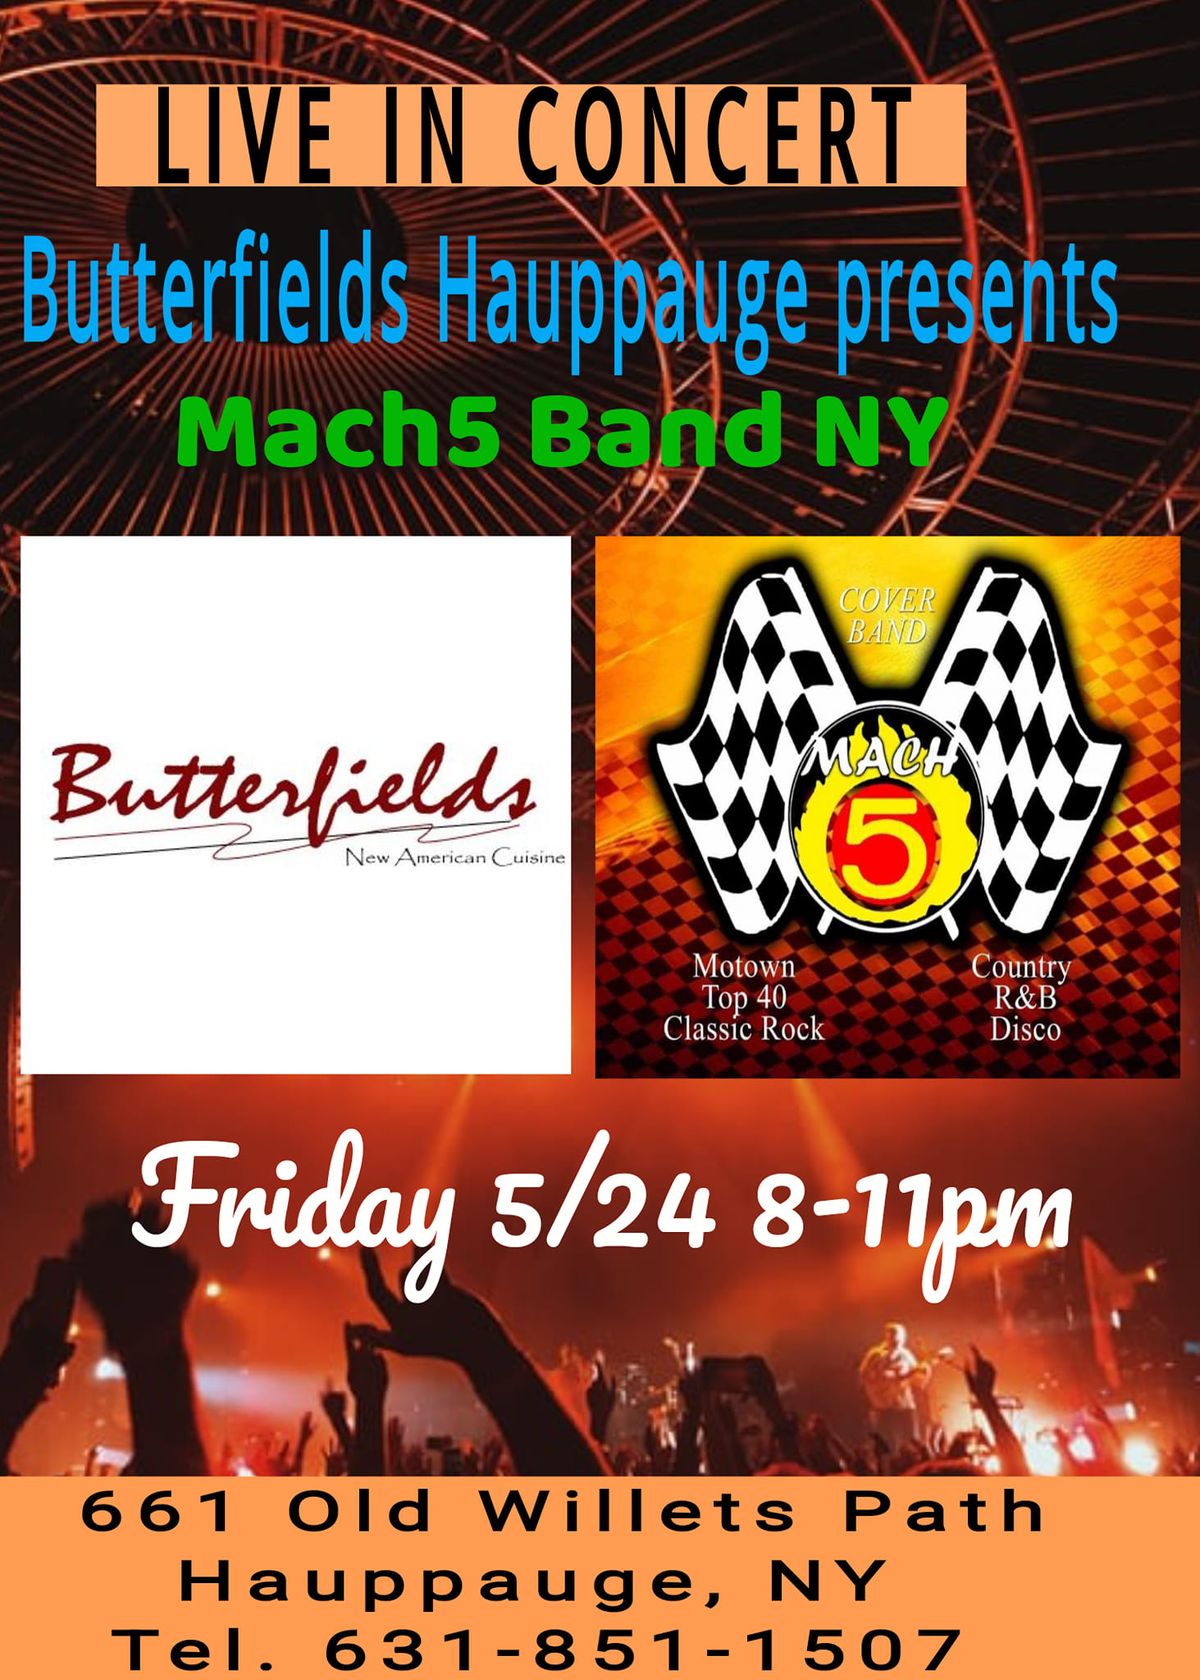 Mach5 Band NY's long awaited return to Butterfields Restaurant! 